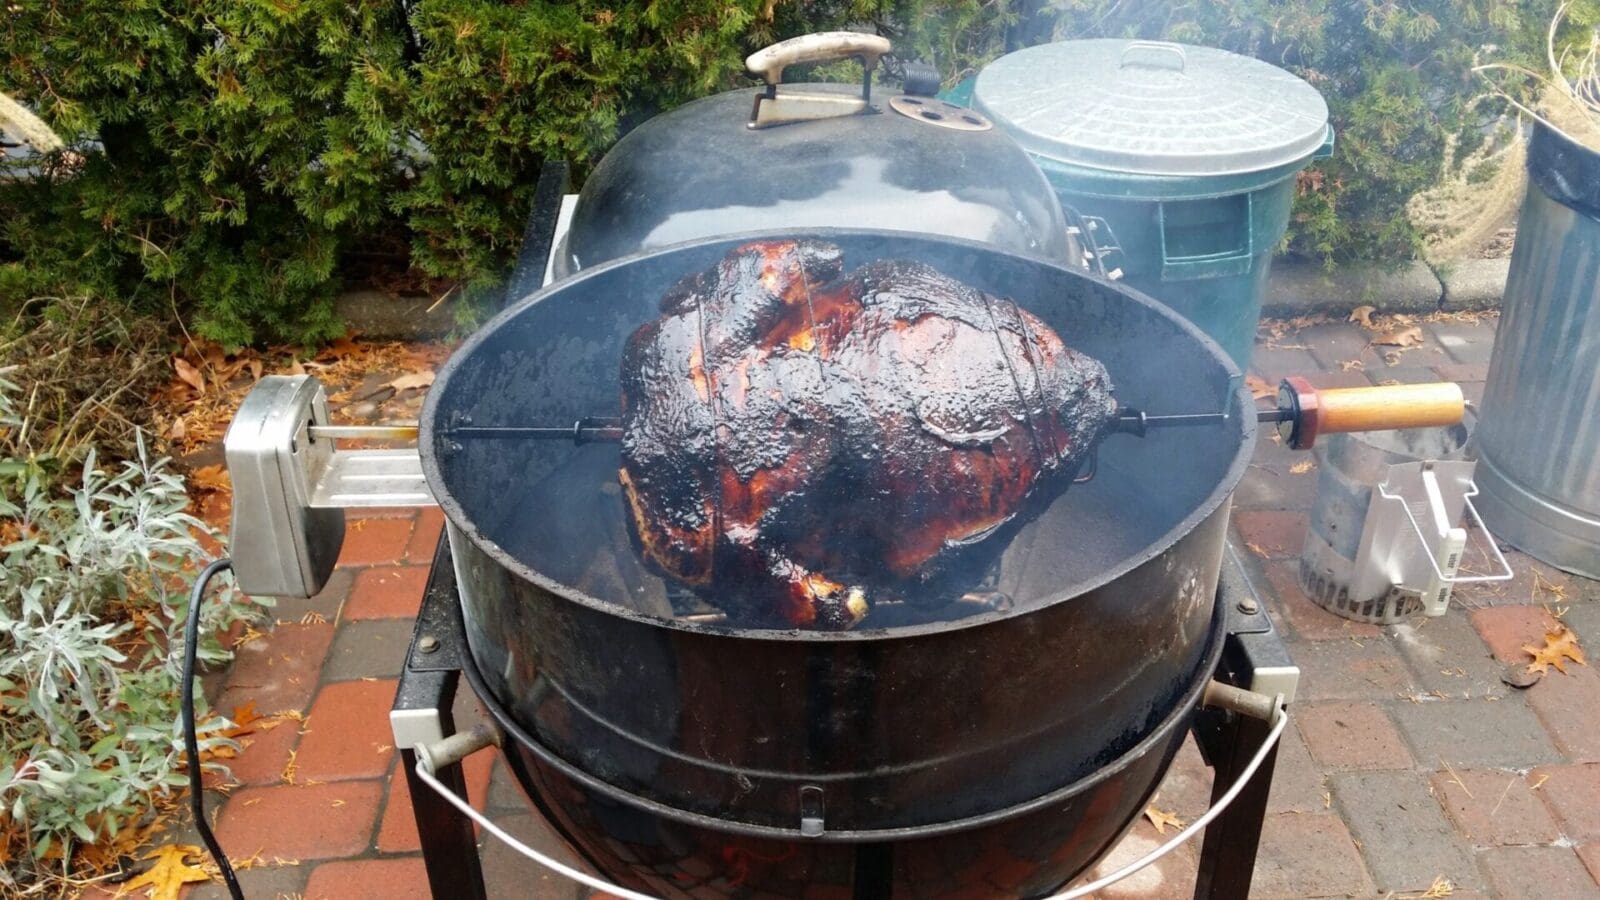 A bbq brisket is being cooked on a bbq grill.